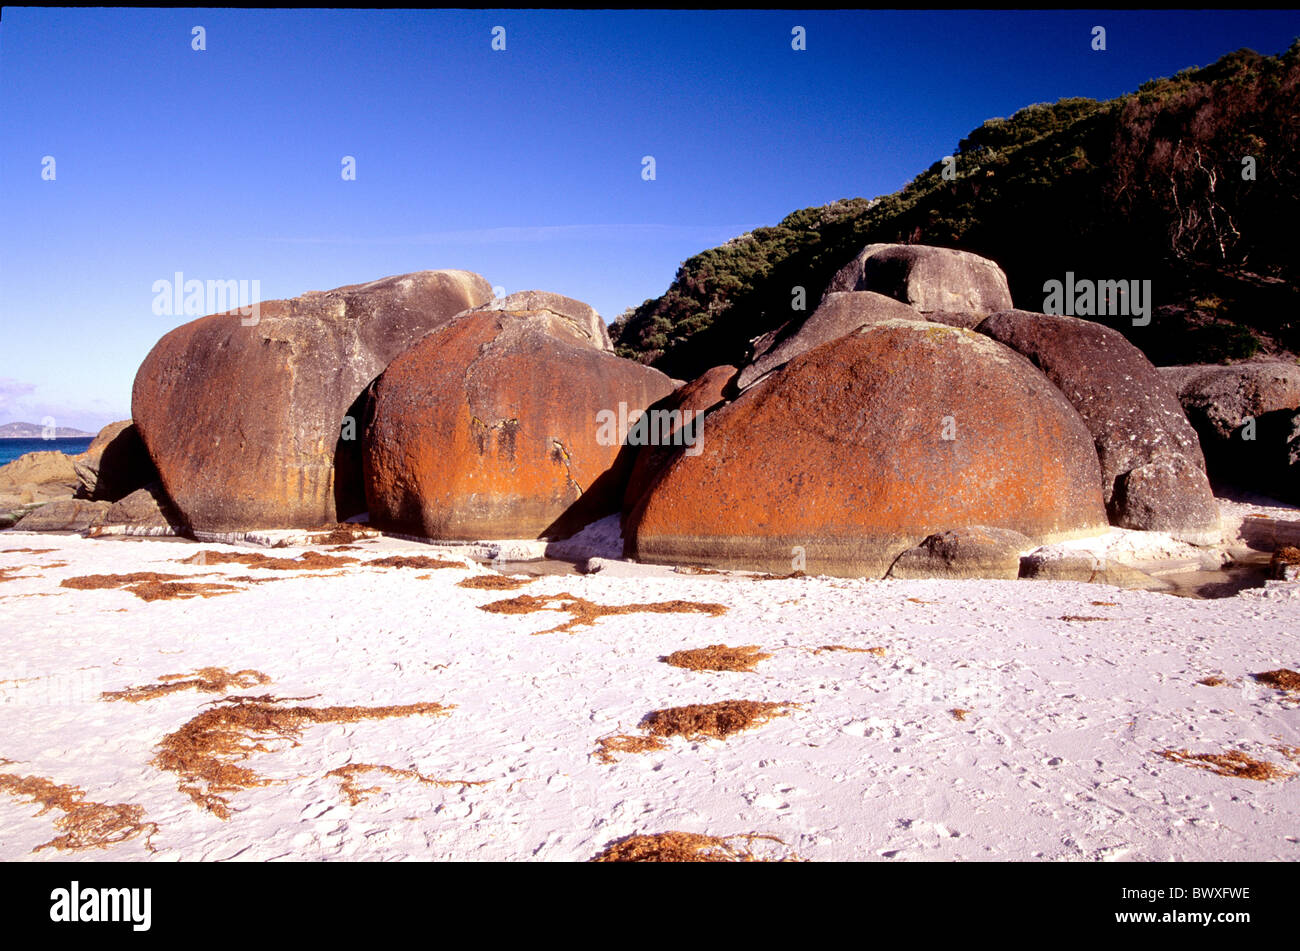 rounded rounded off algae Australia rock cliff formations groups reddish Squealy Bay beach seashore Vict Stock Photo